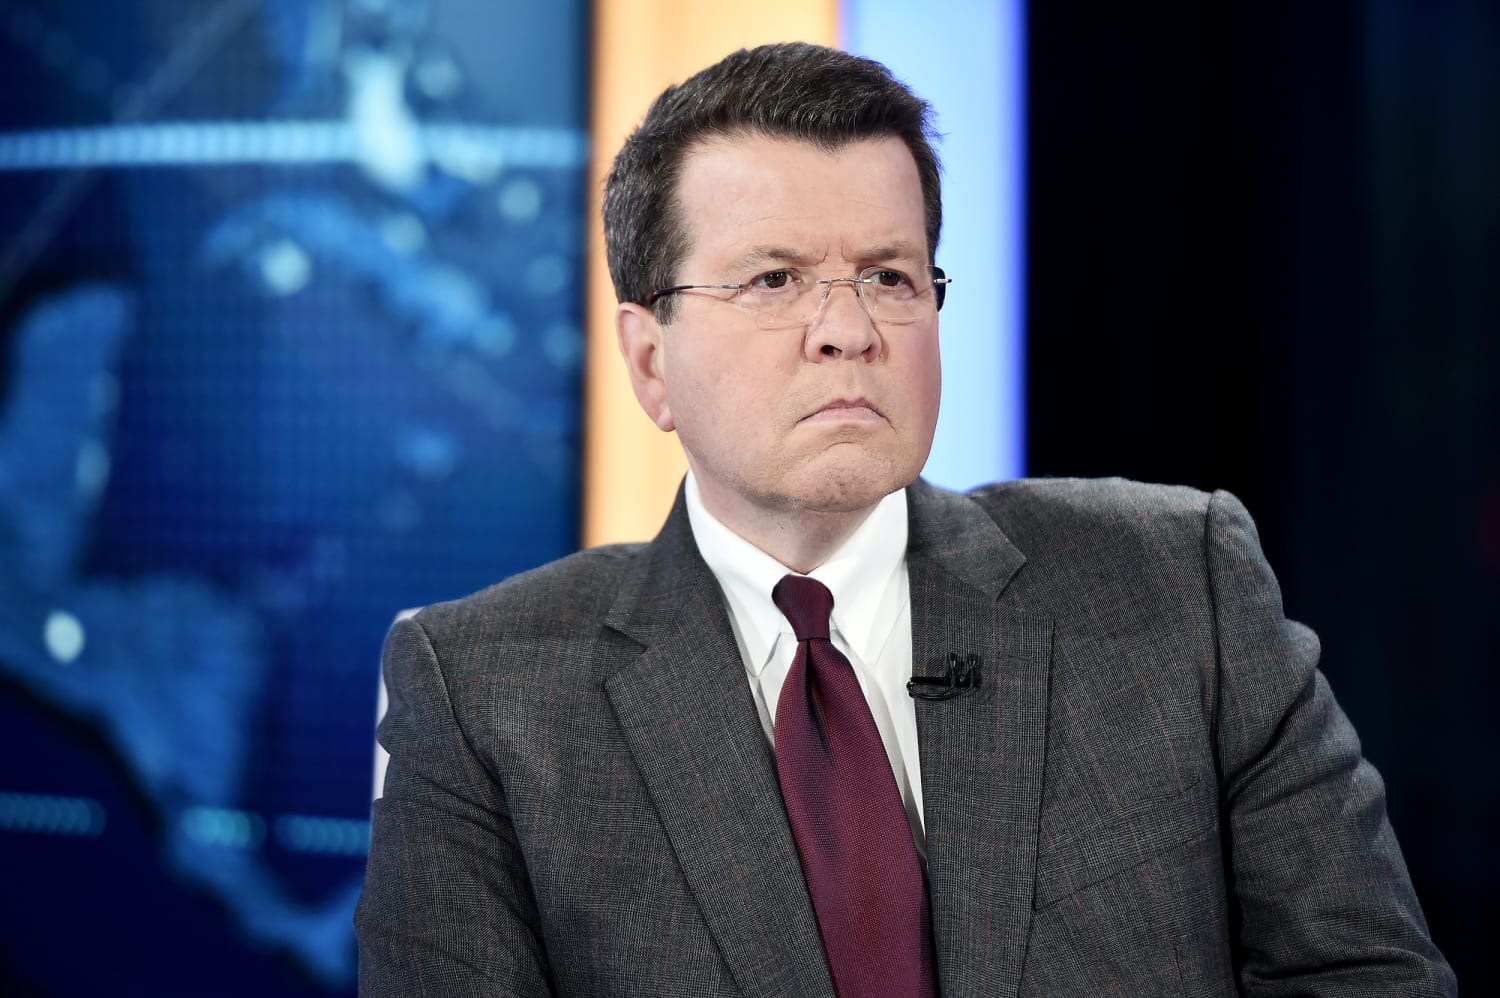 Fox News’ Neil Cavuto begs viewers to ‘stop the suffering’ and get vaccinated